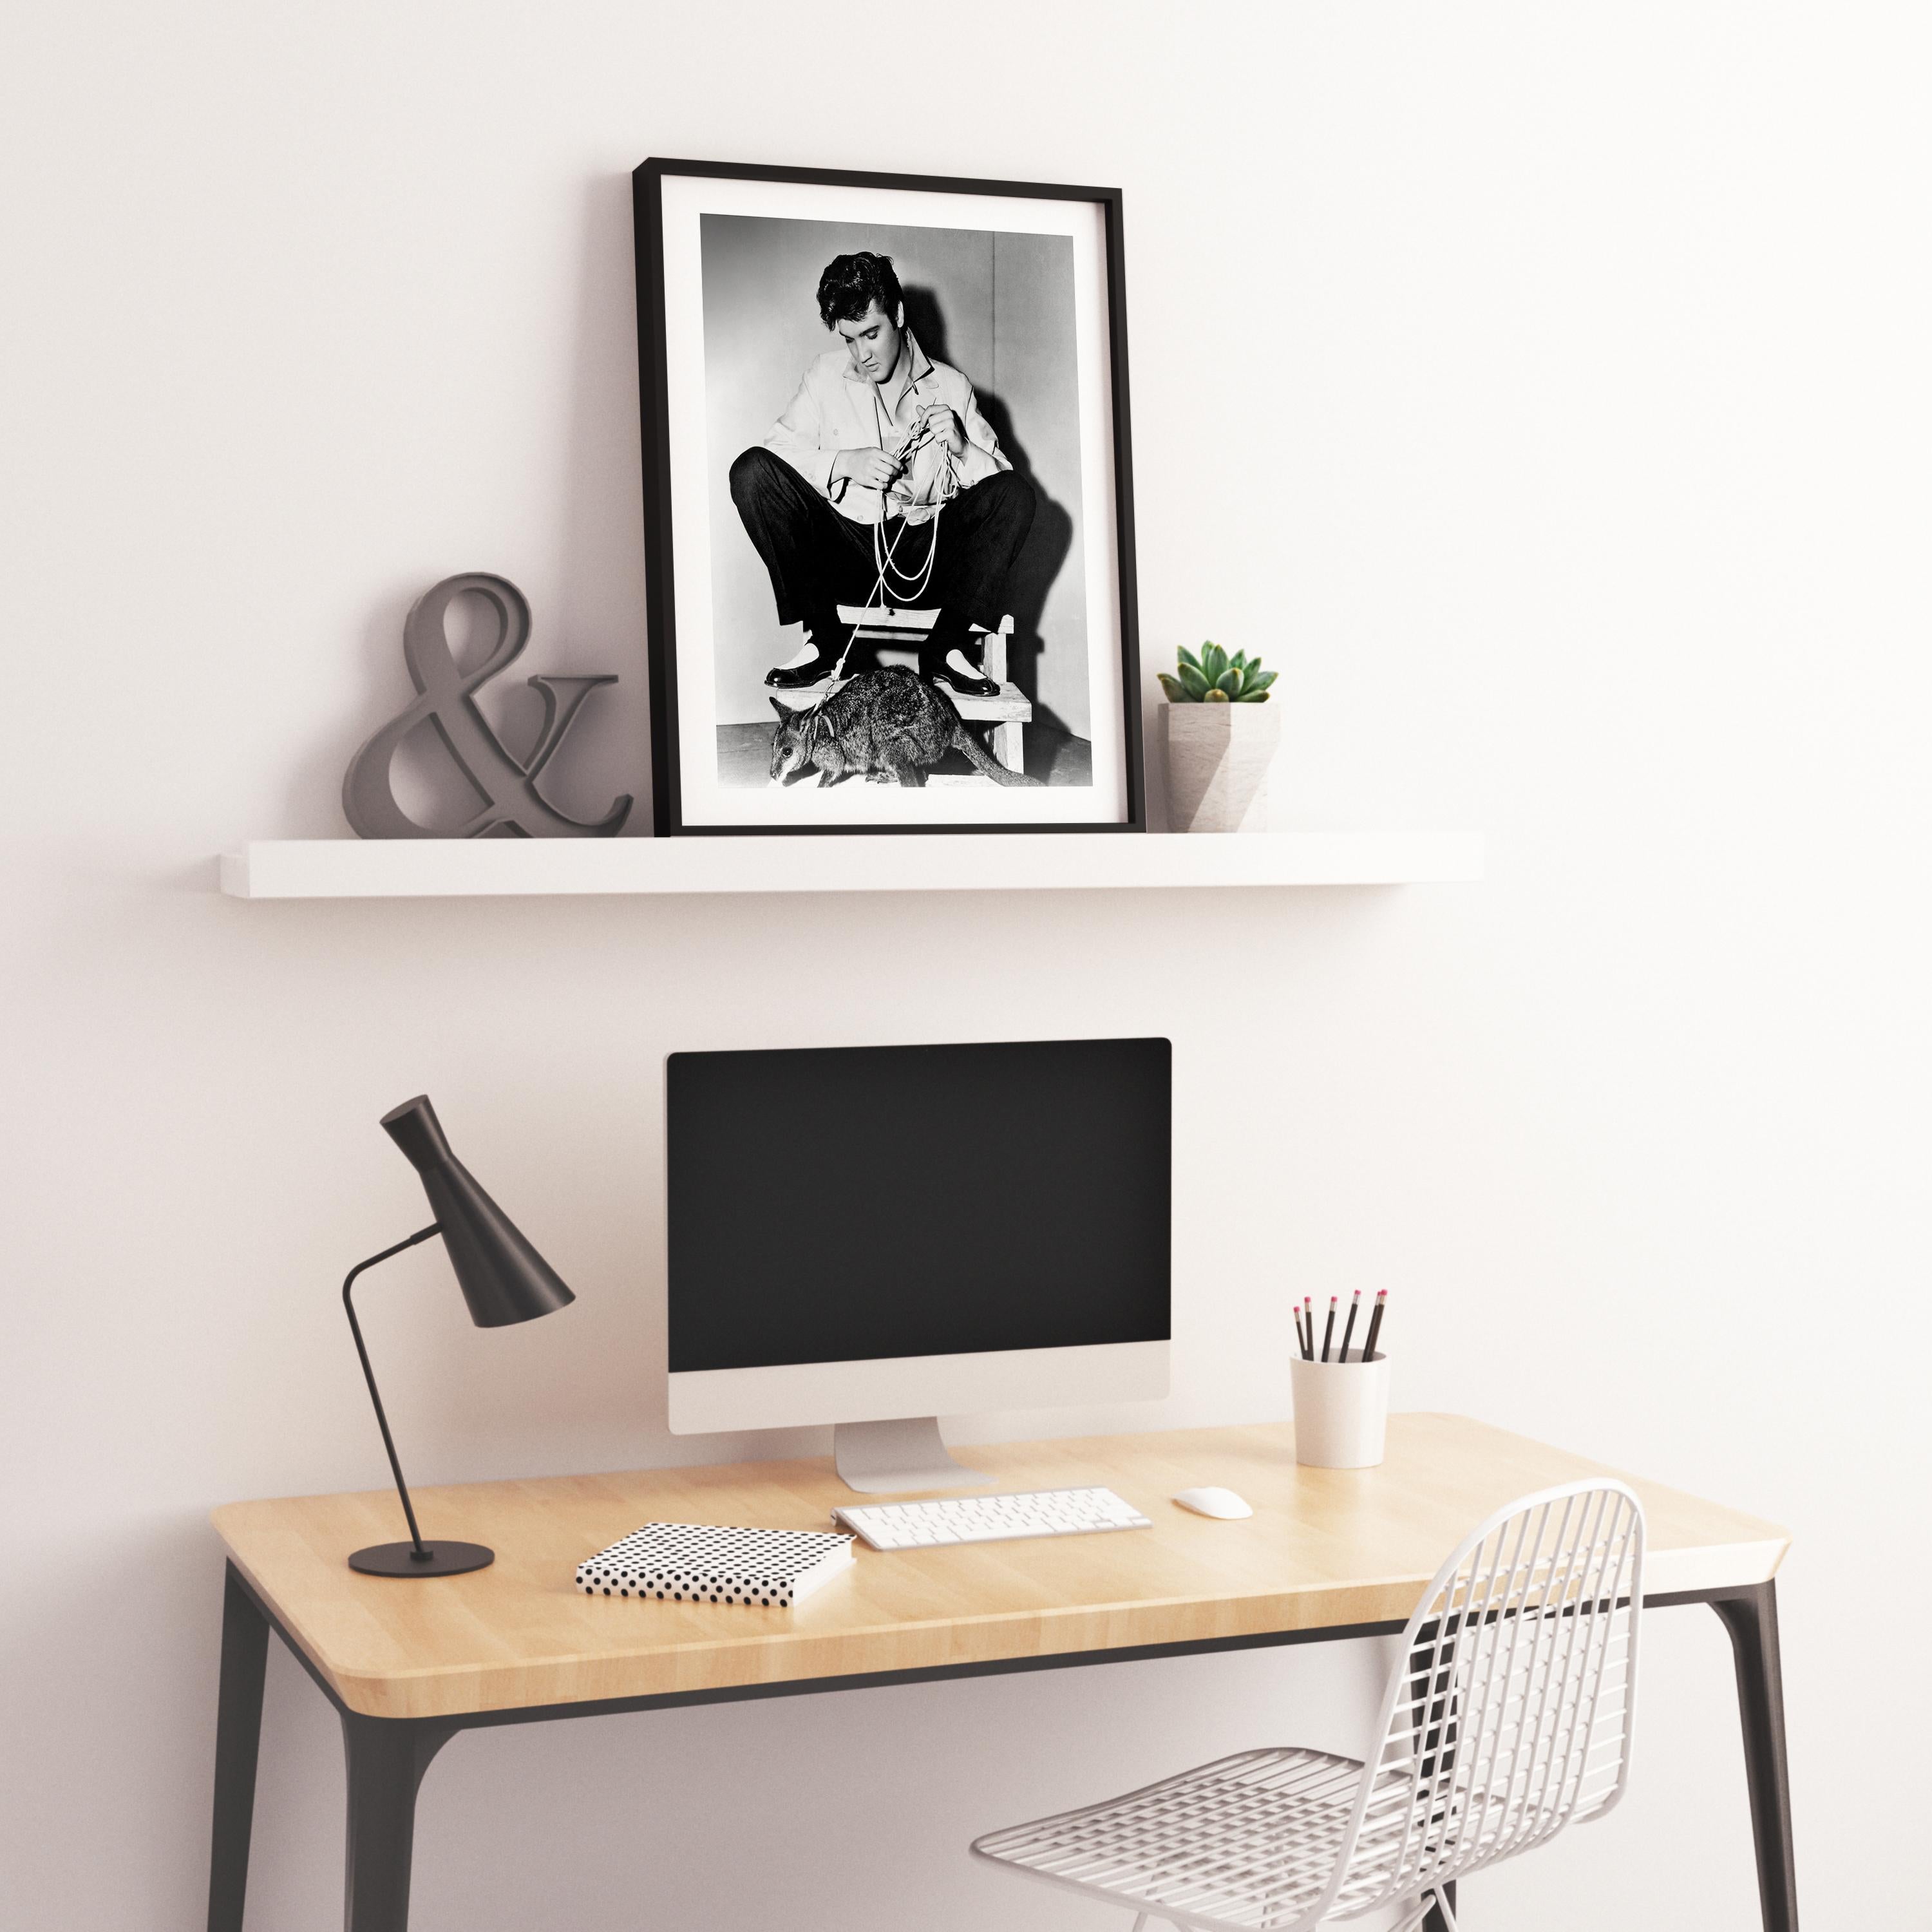 Elvis Presley: The King with His Kangaroo Globe Photos Fine Art Print - Gray Black and White Photograph by Unknown